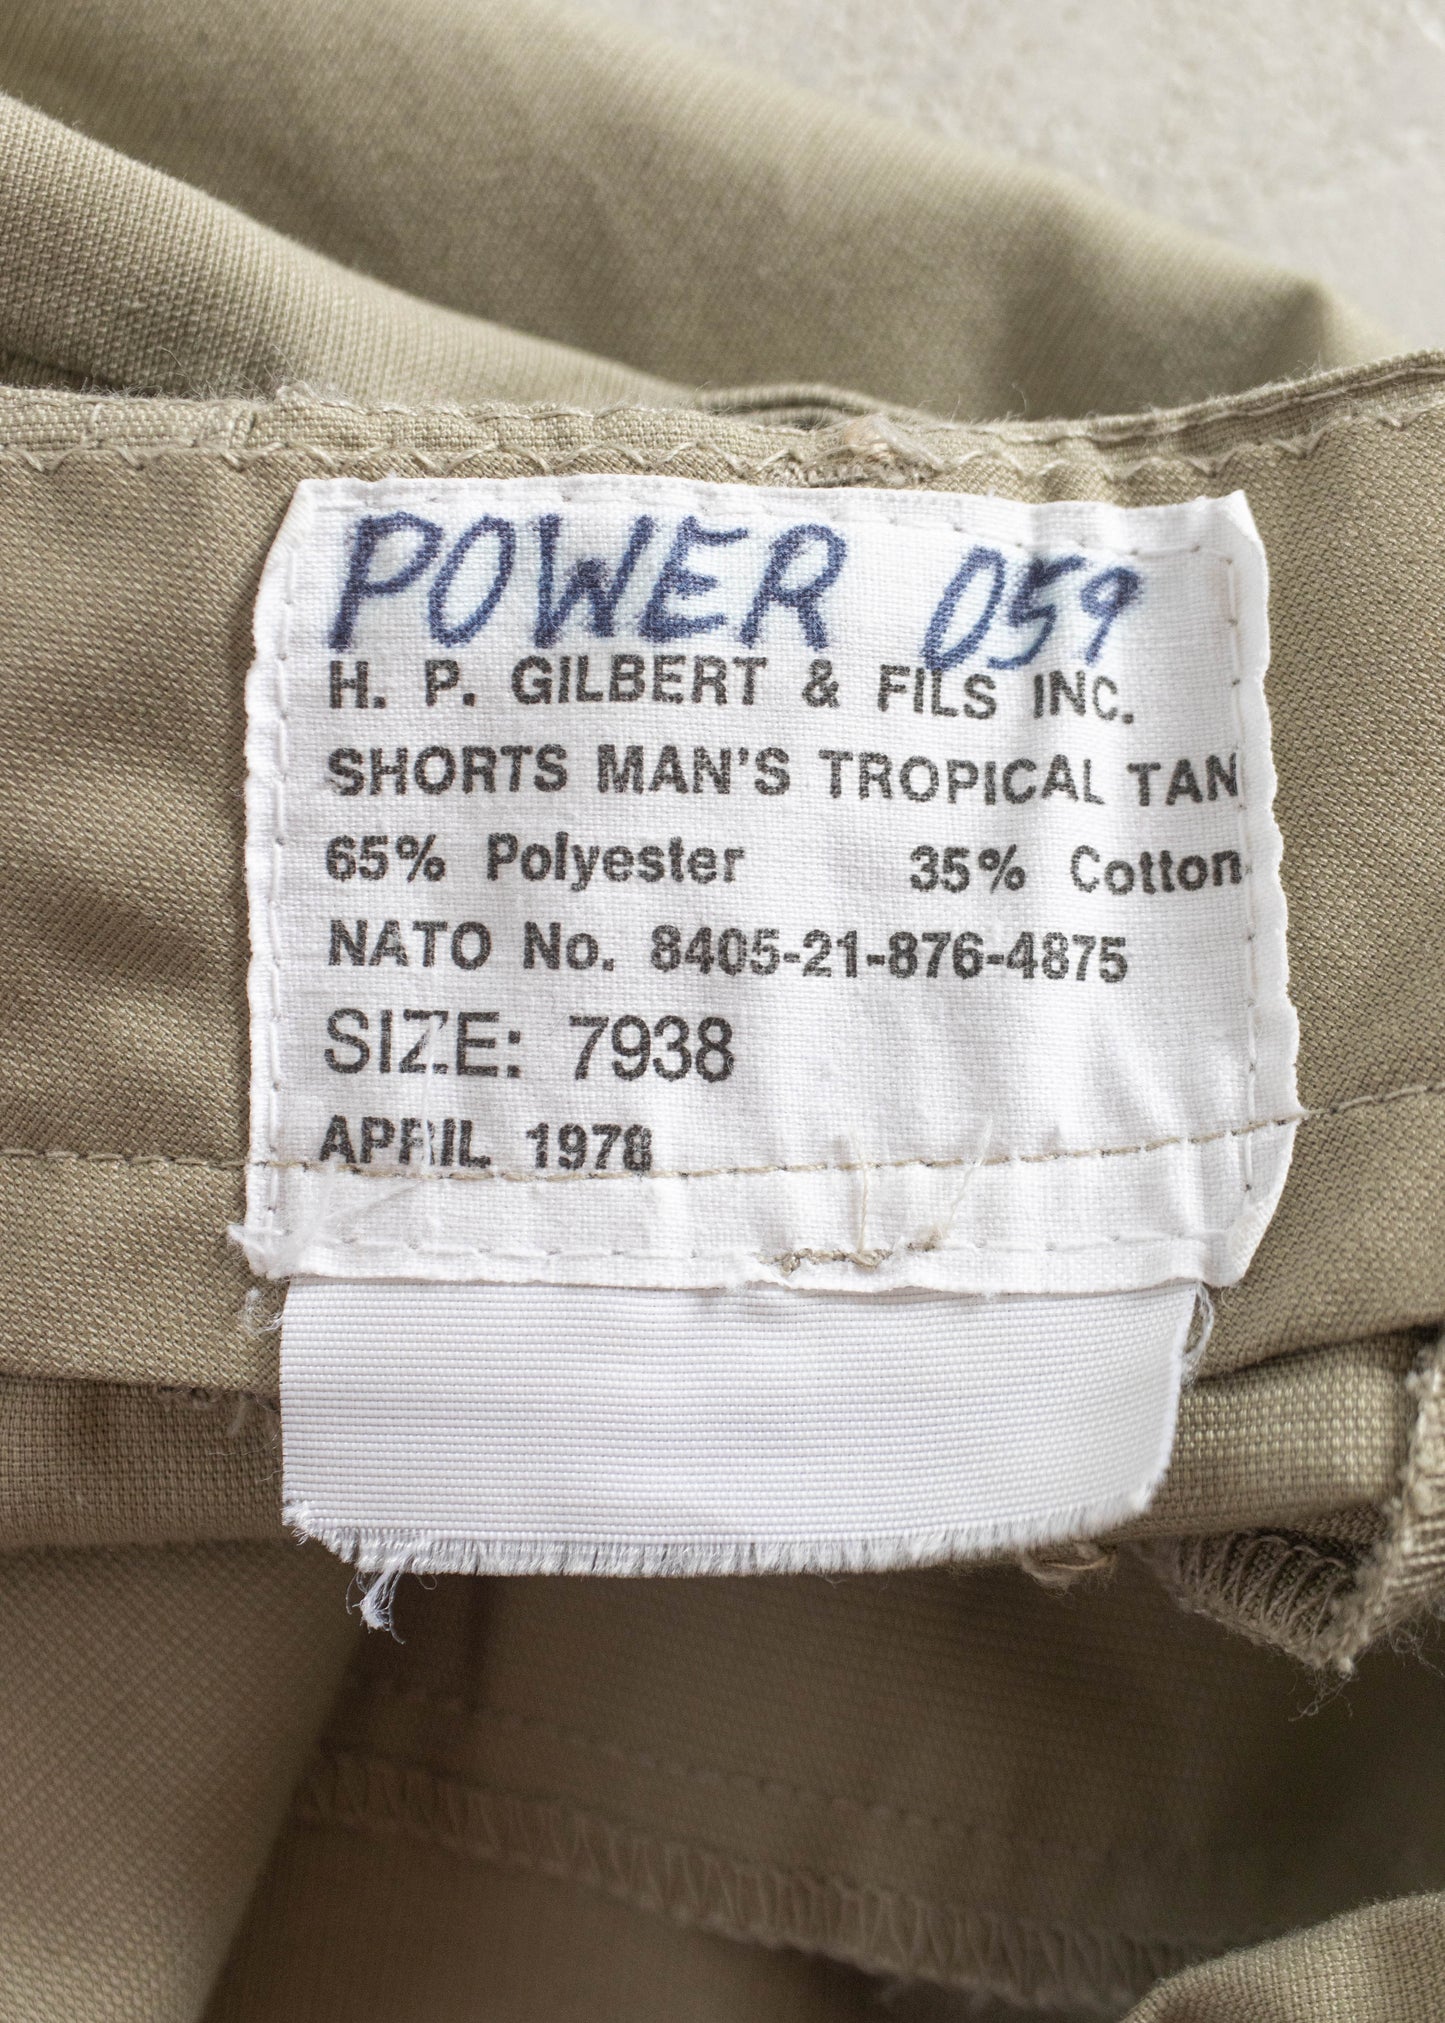 Vintage 1970s French Military Shorts Size Women's 32 Men's 34